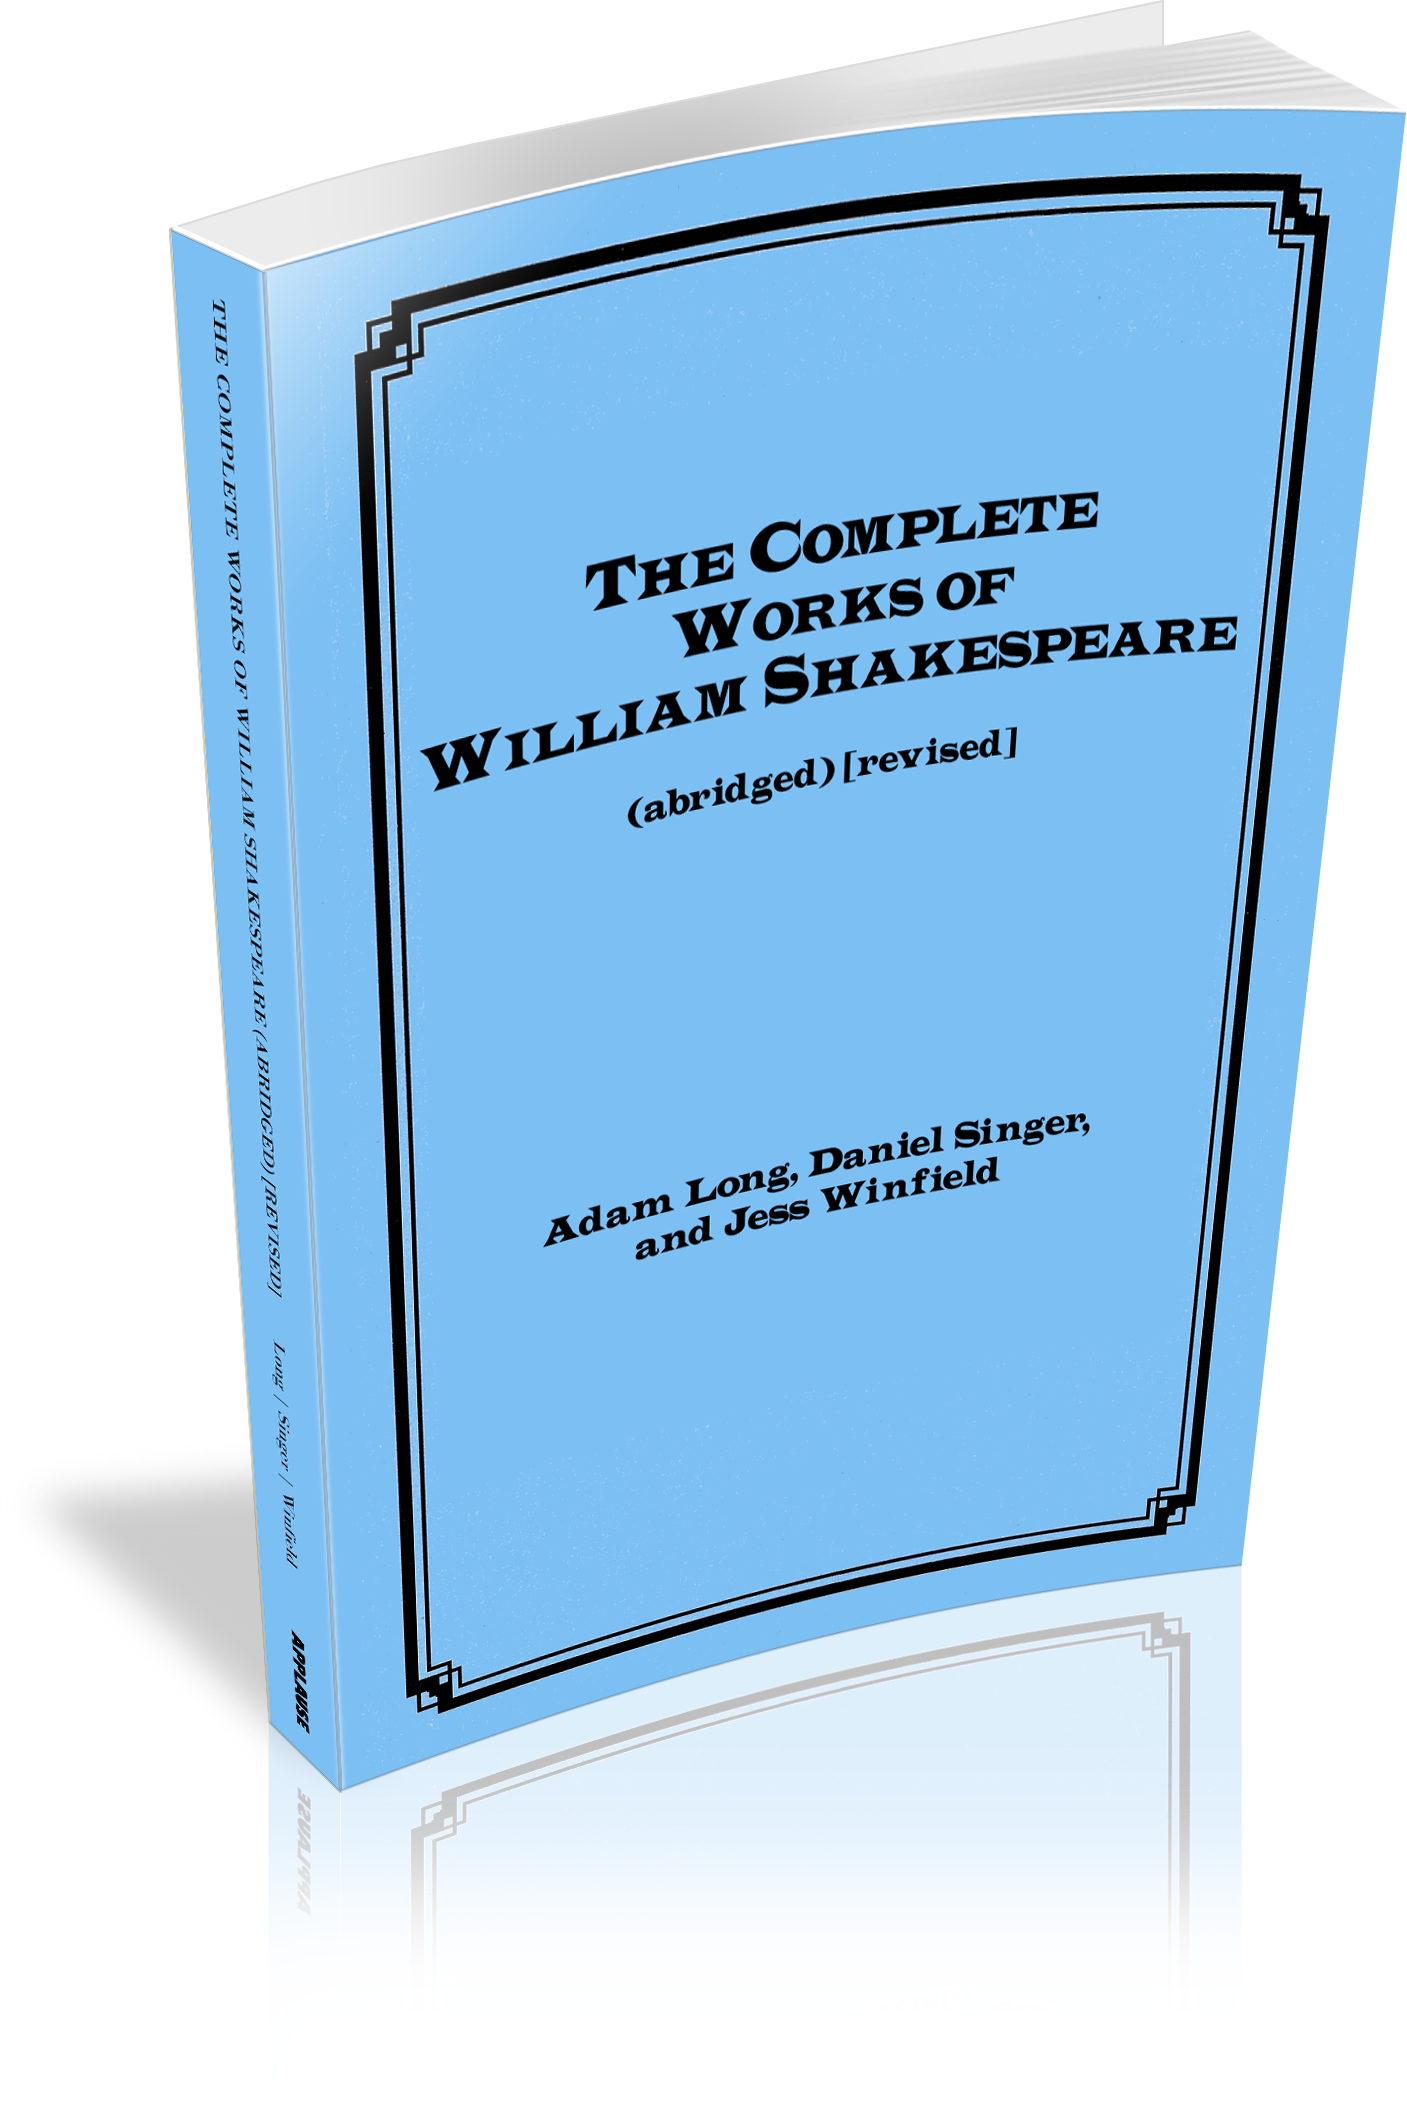 The Complete Works of William Shakespeare (abridged) revised image